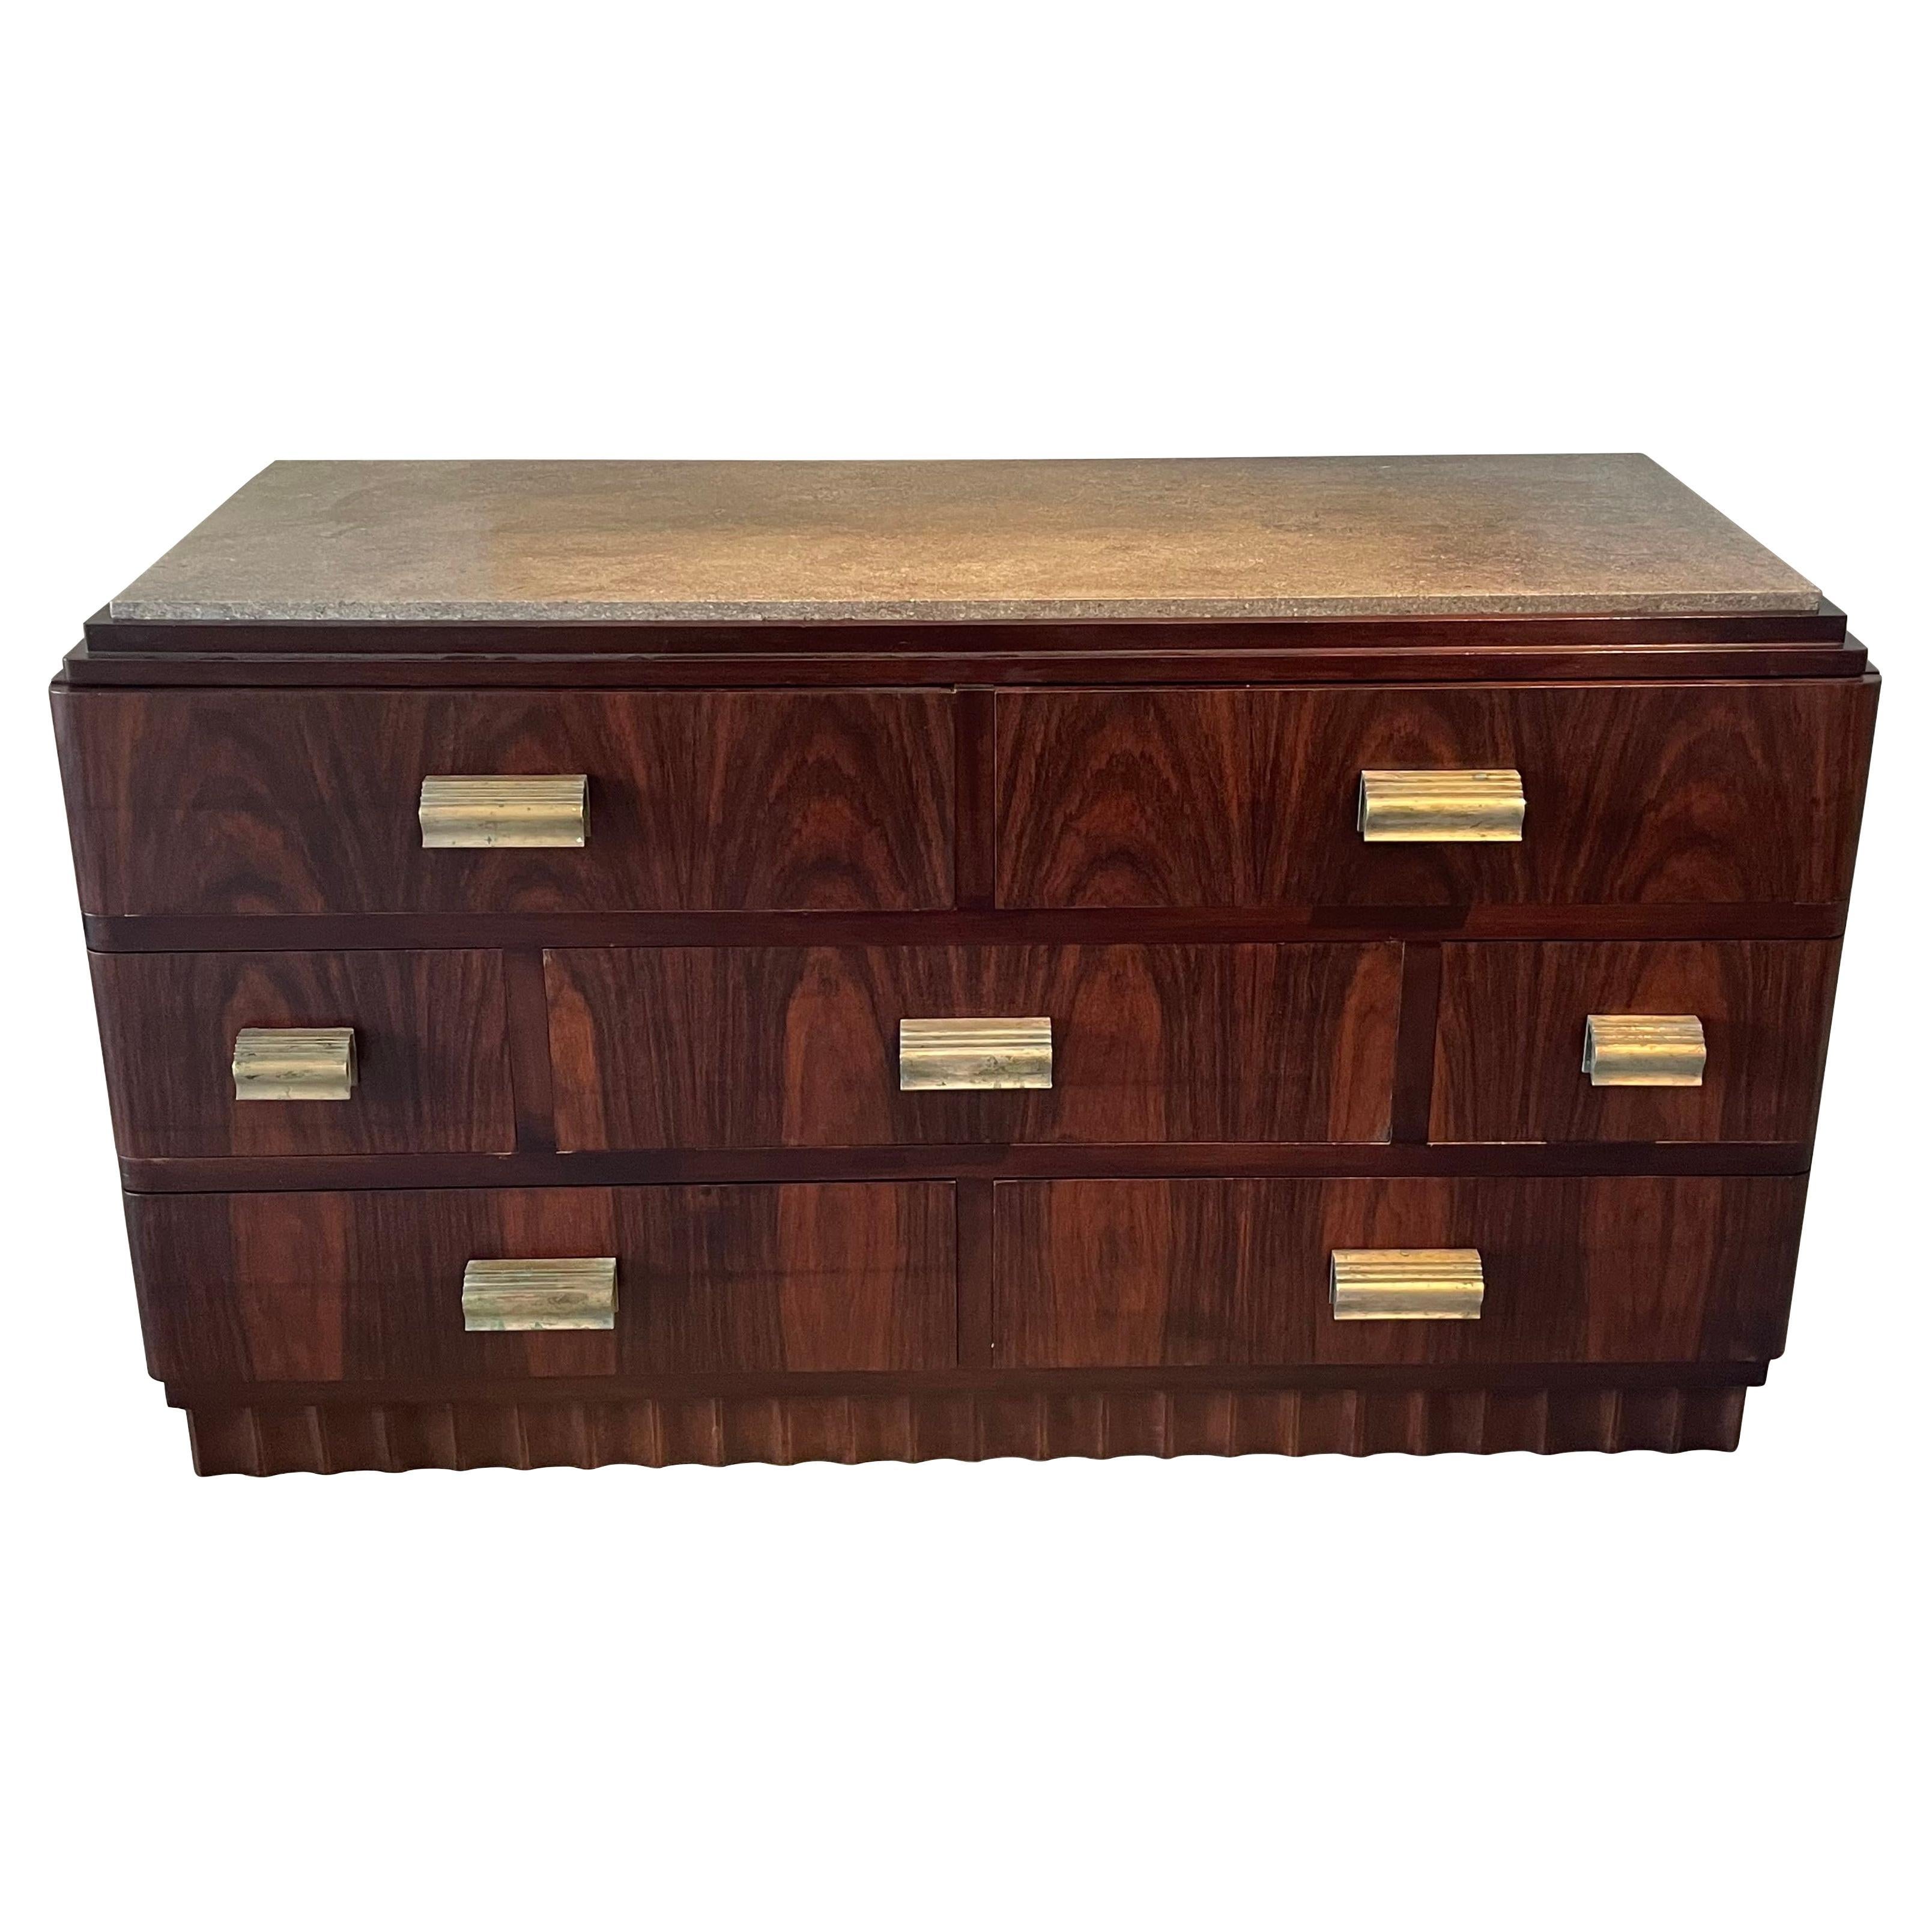 Christian Krass Seven Drawer Marble Top Walnut Commode, France, 1930s